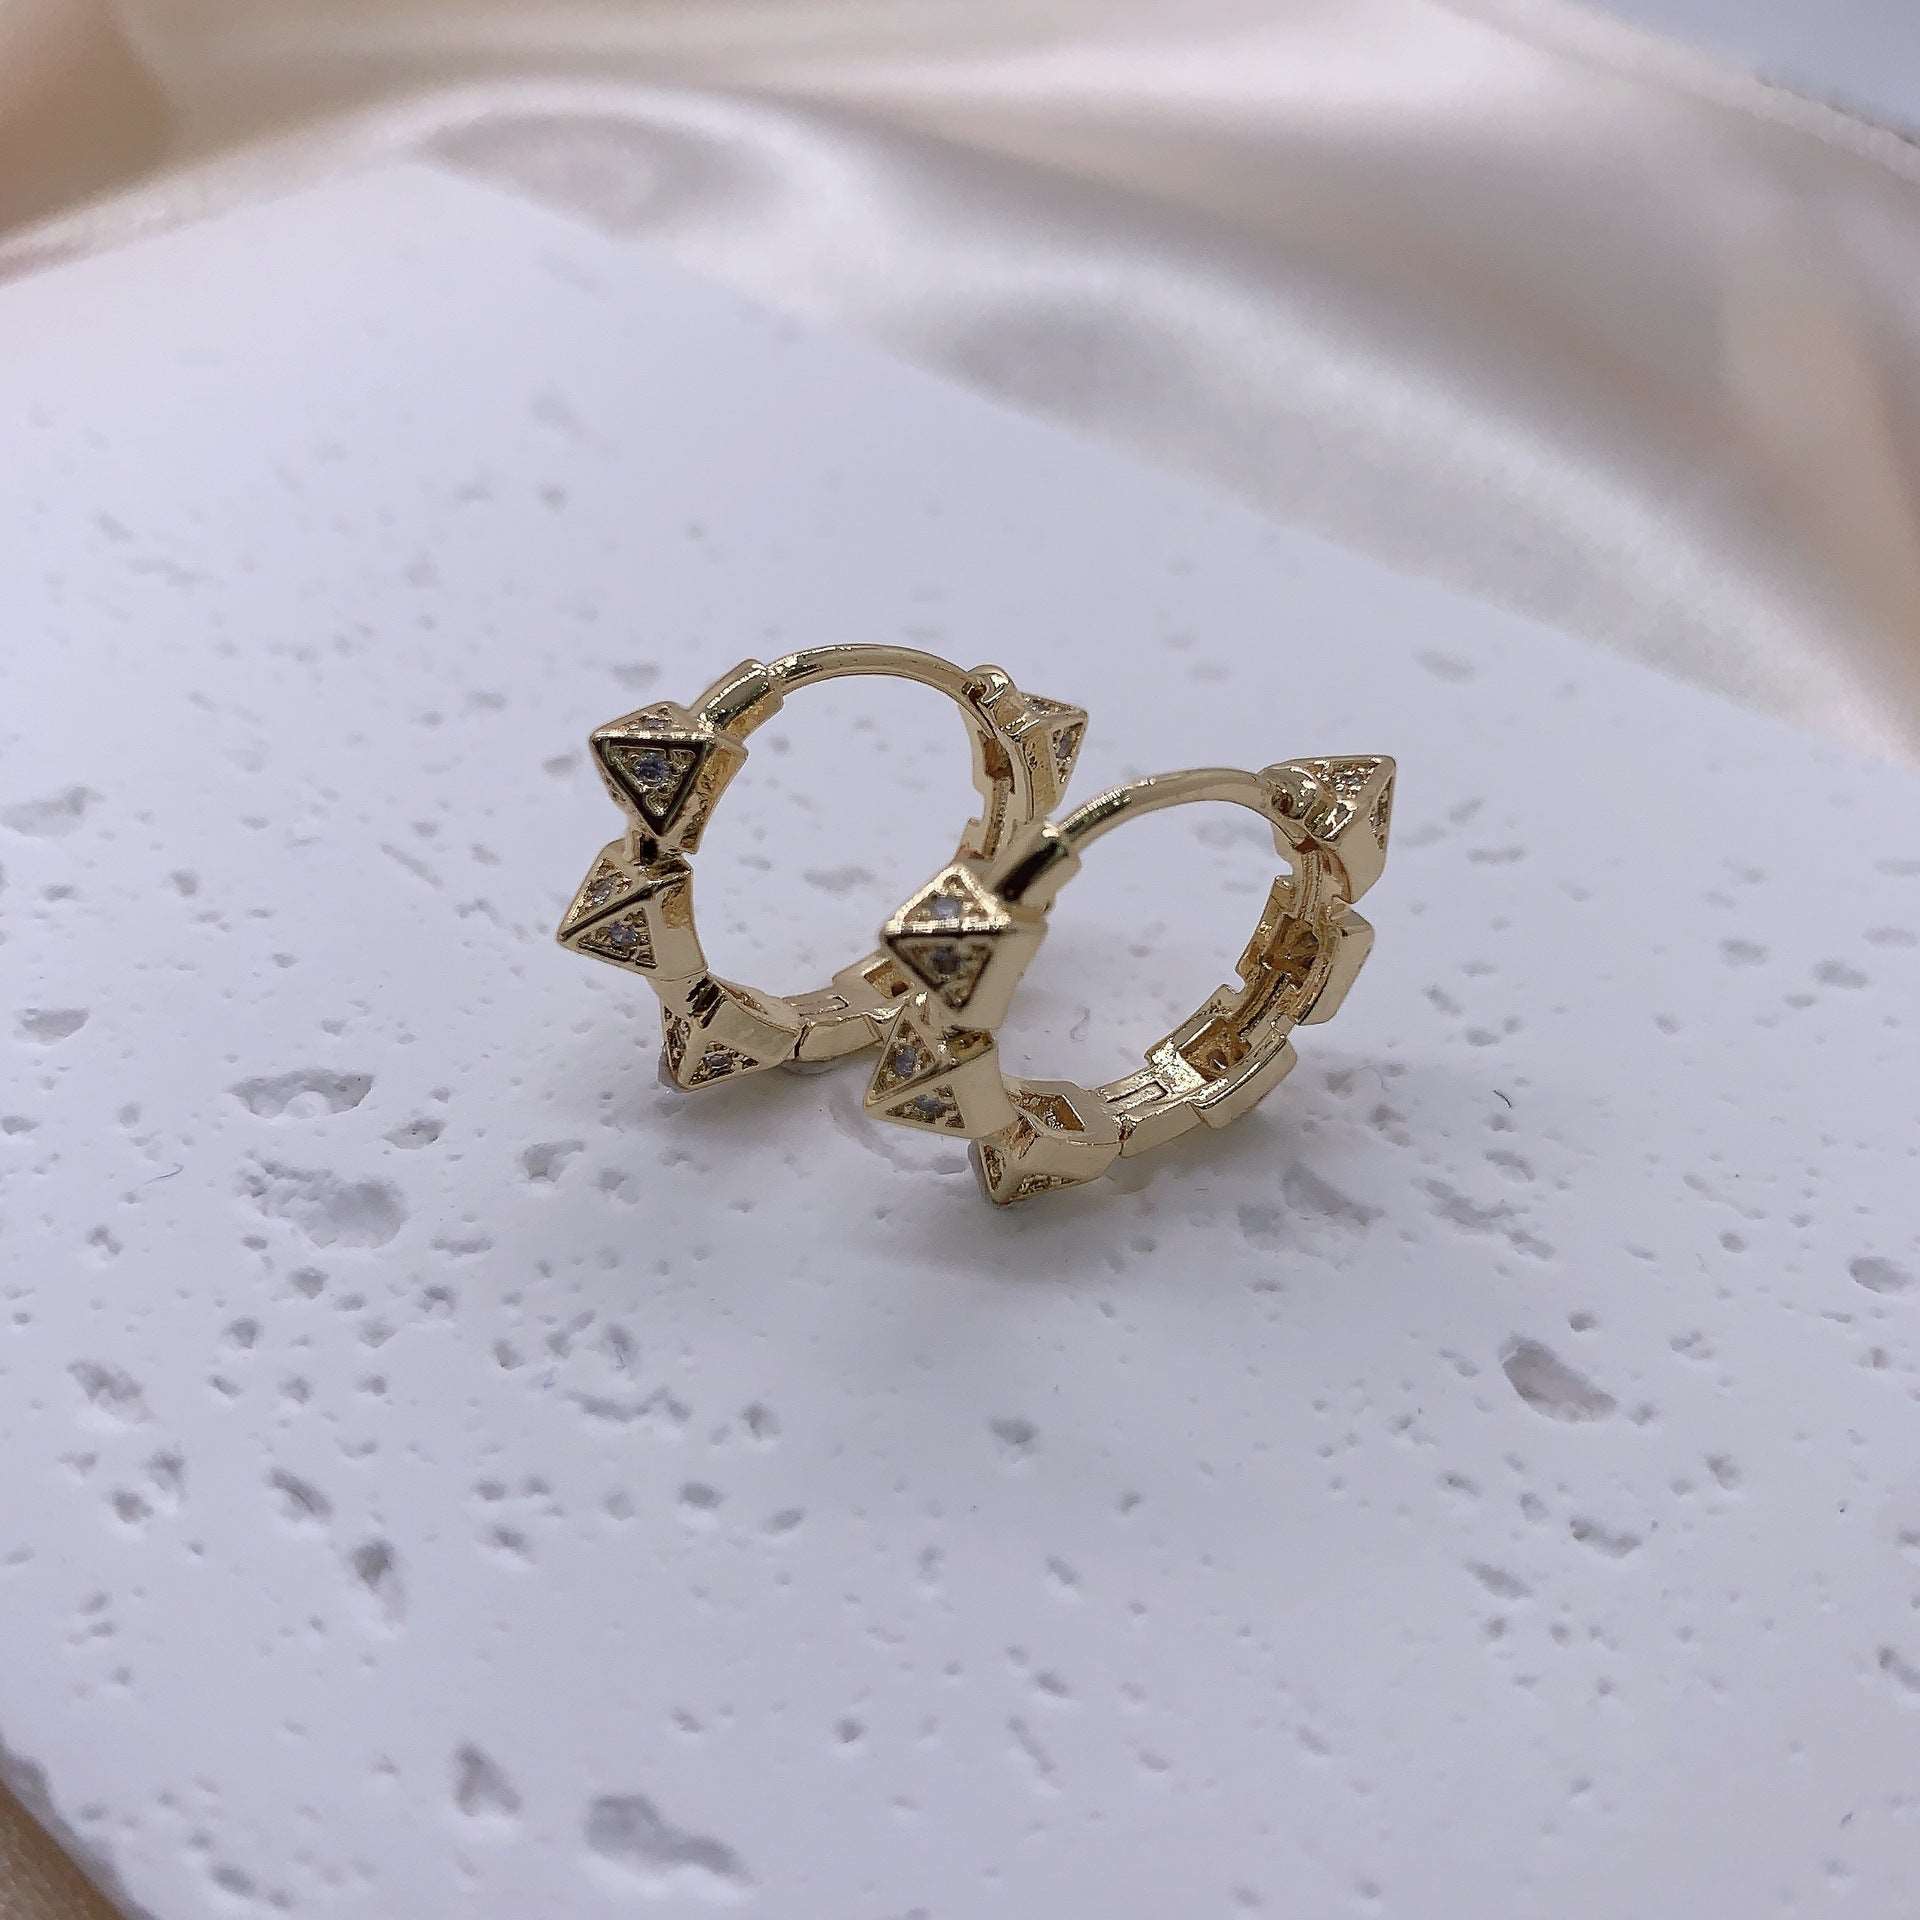 Small Gold Spiked Hoop Earrings - Gold